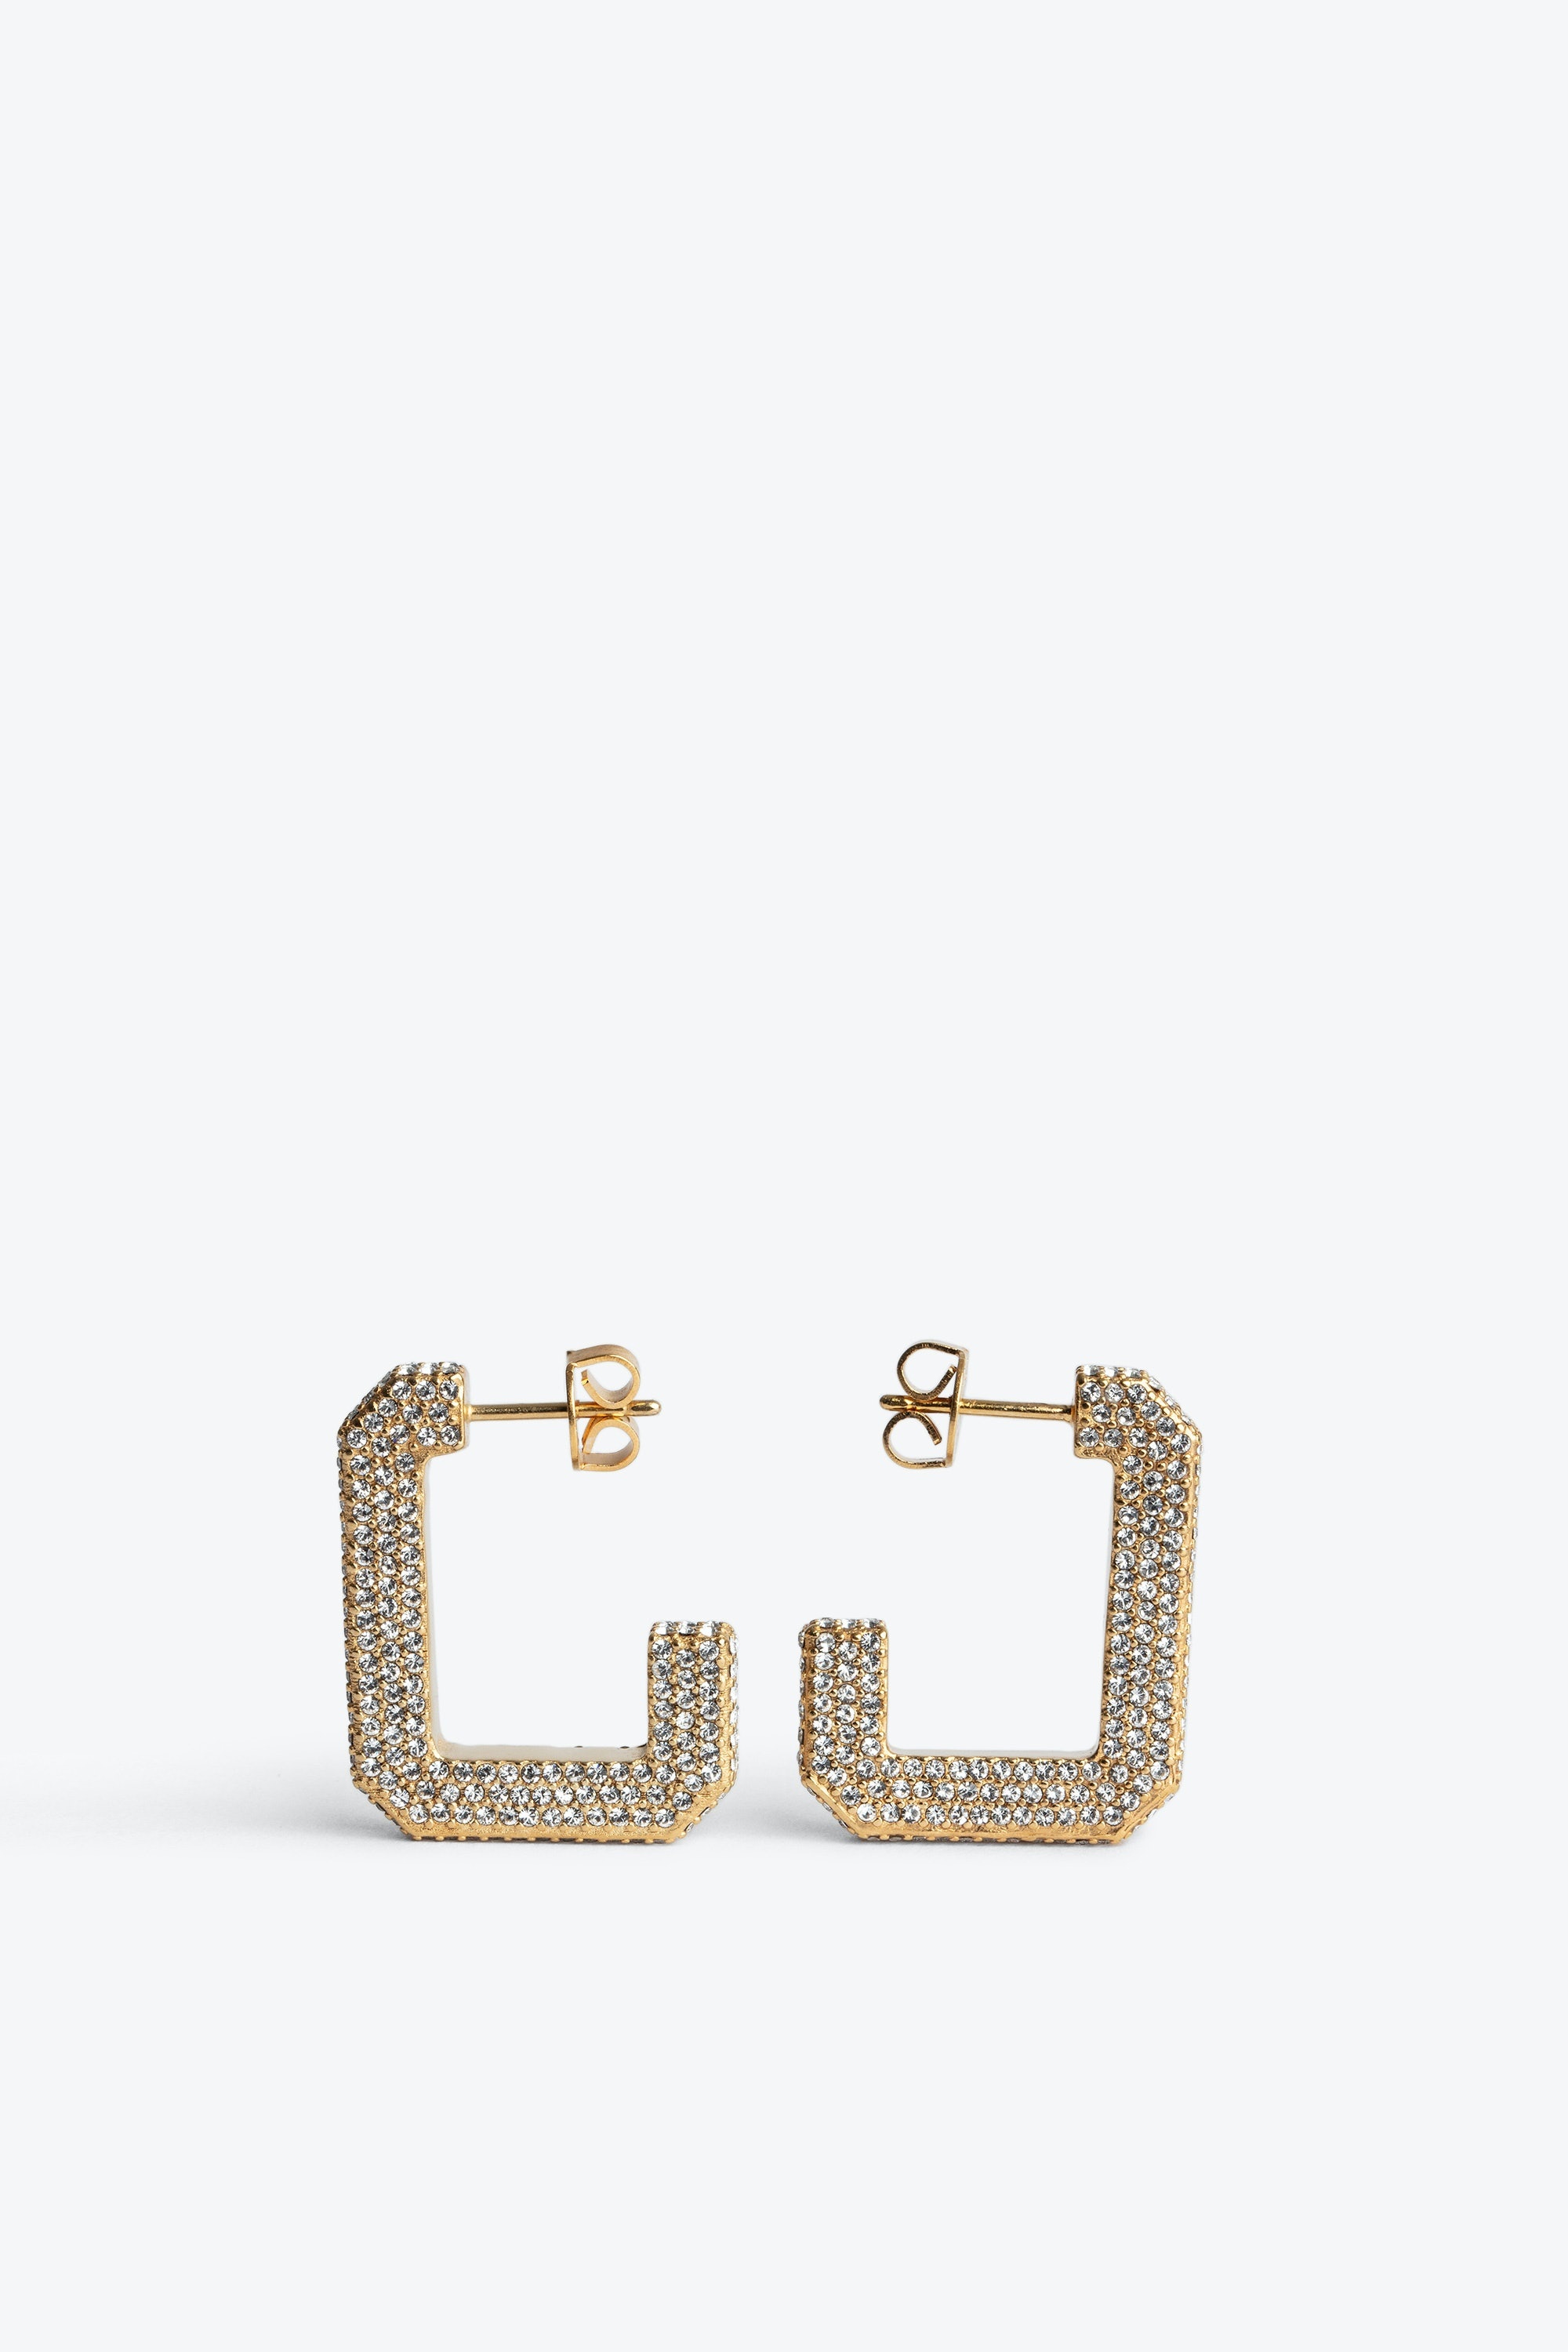 Cecilia Strass Earrings - 3